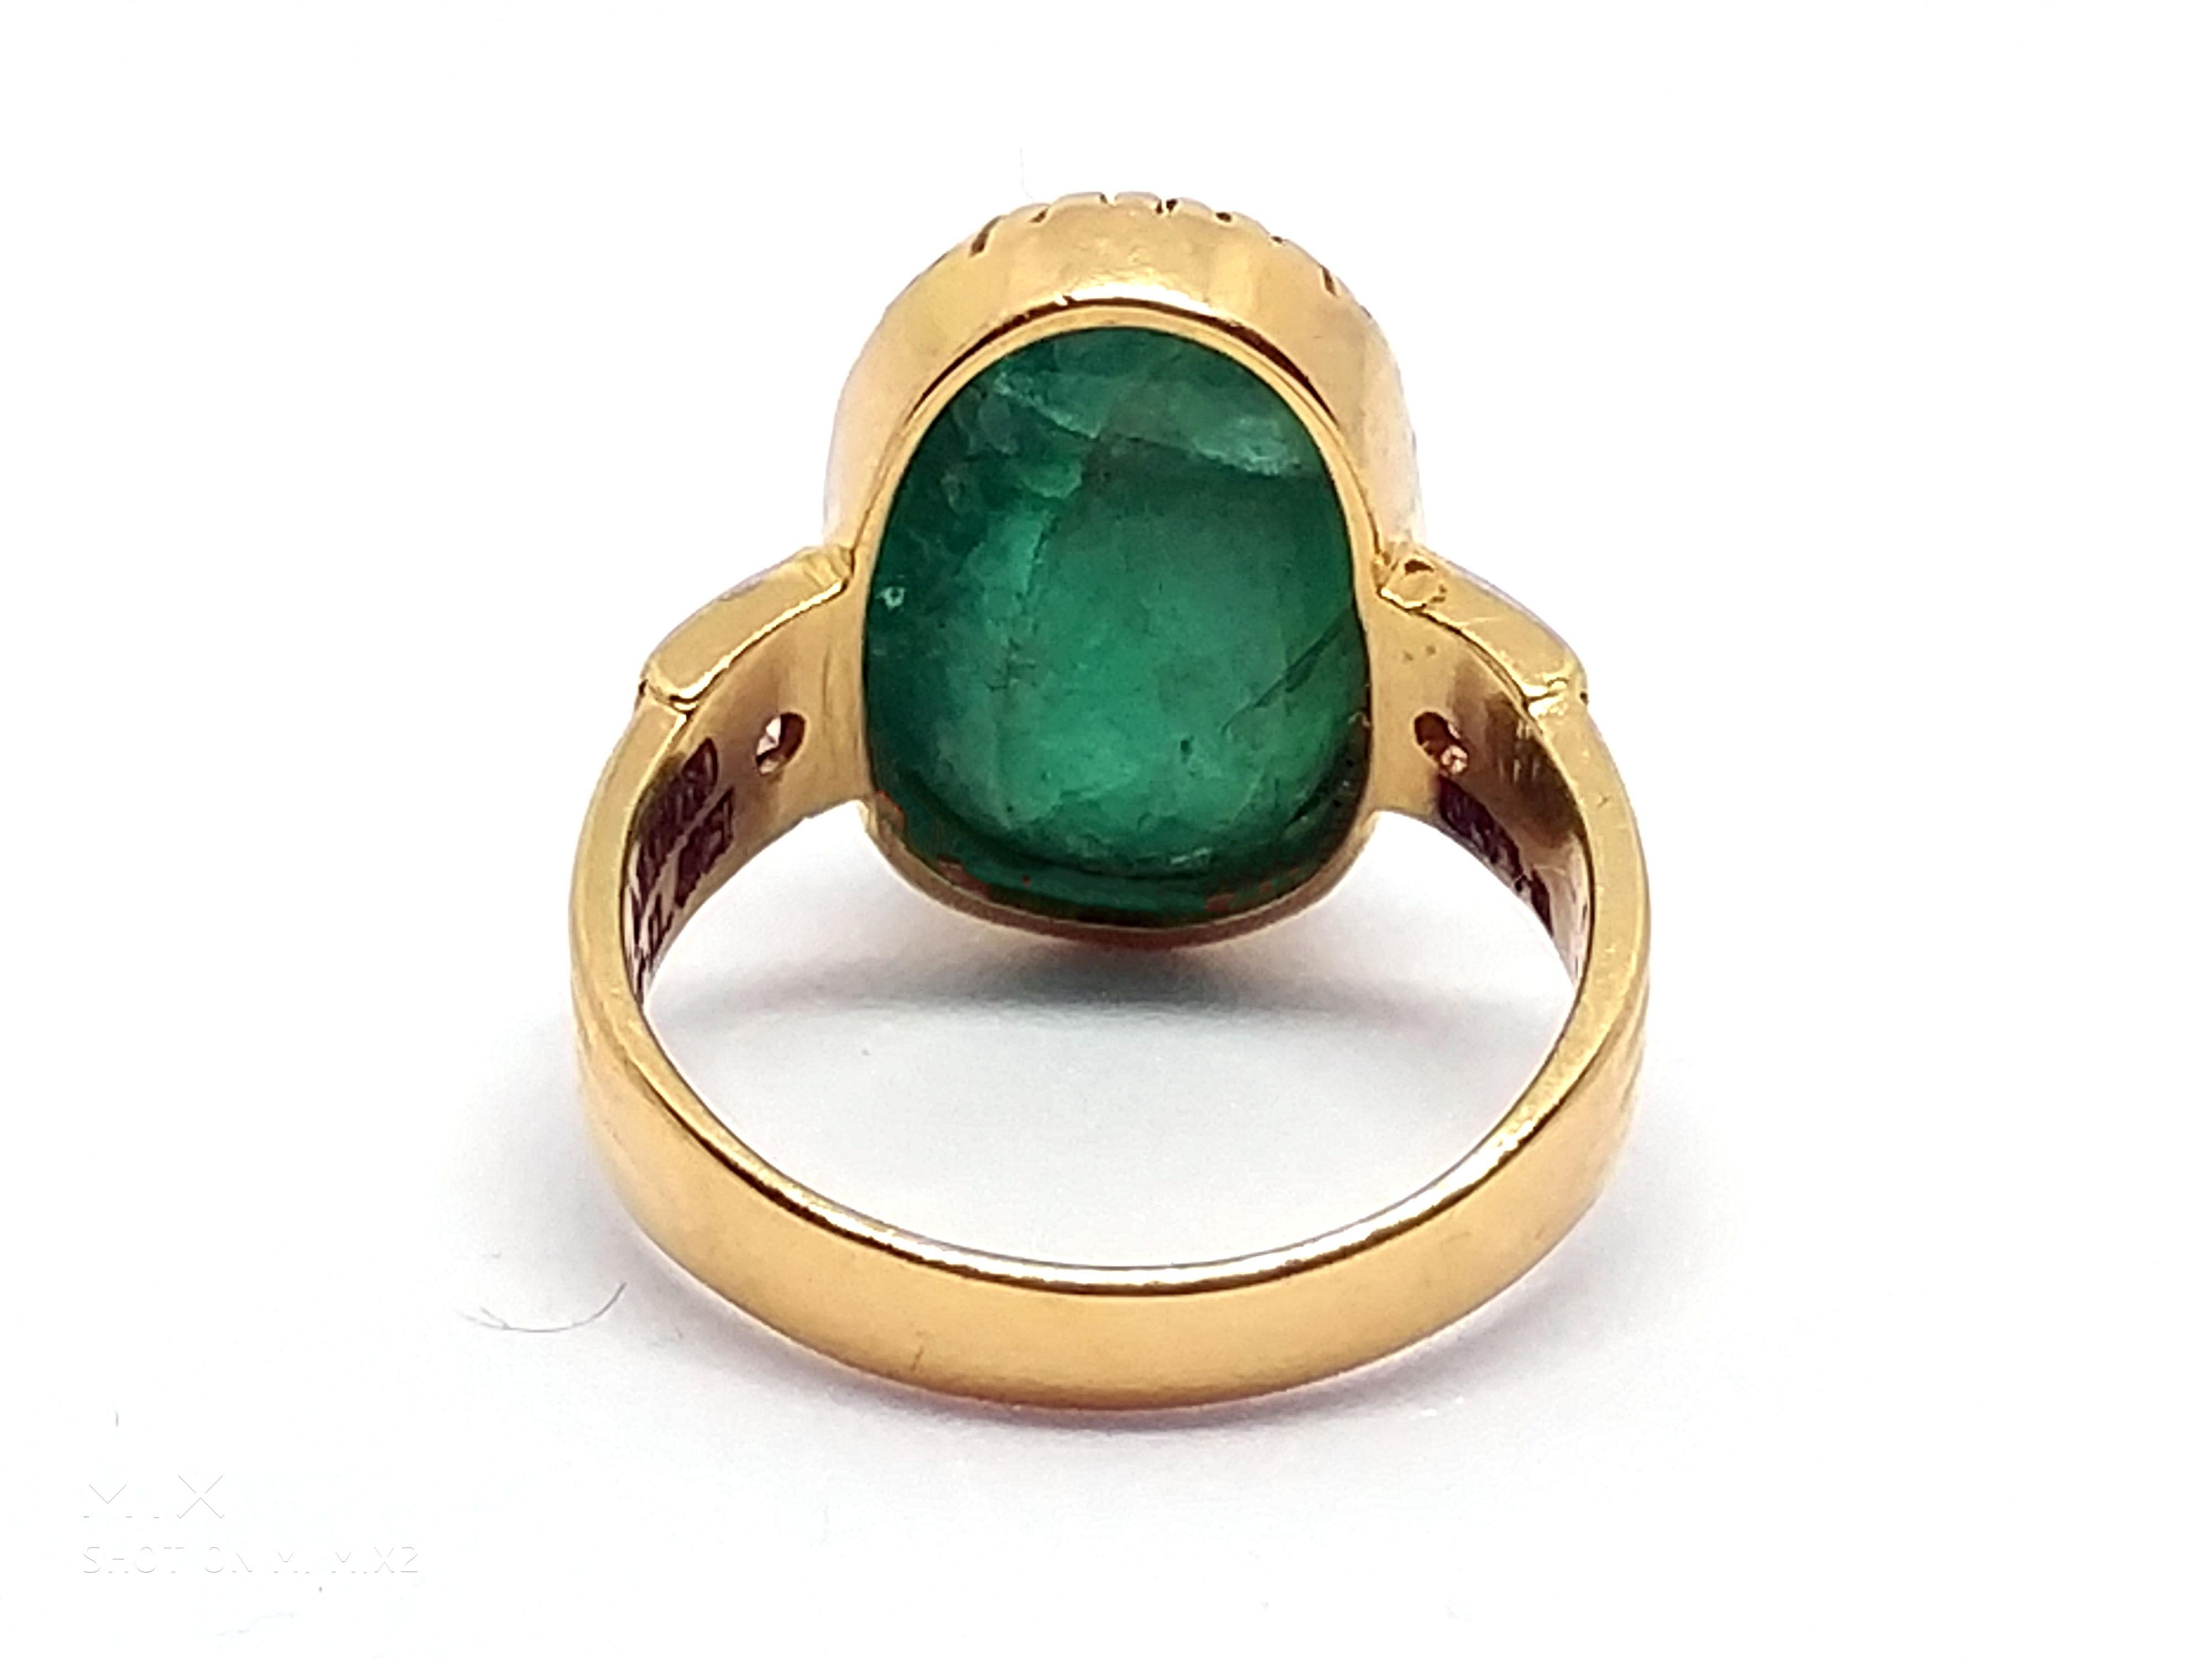 12 Carat Intense Green Emerald and Diamond Ring, circa 1940 In Excellent Condition For Sale In London, GB